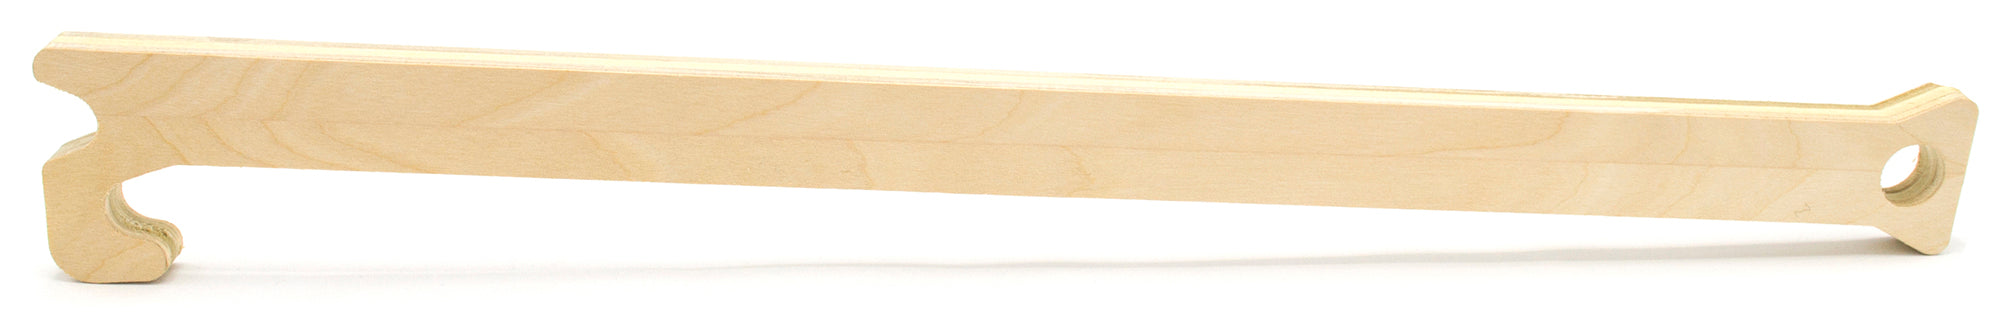 Oven Rack Push Puller for Baking, Made in America 16.5" L x 2.125" H x 0.5" W, unfinished American Birch Plywood